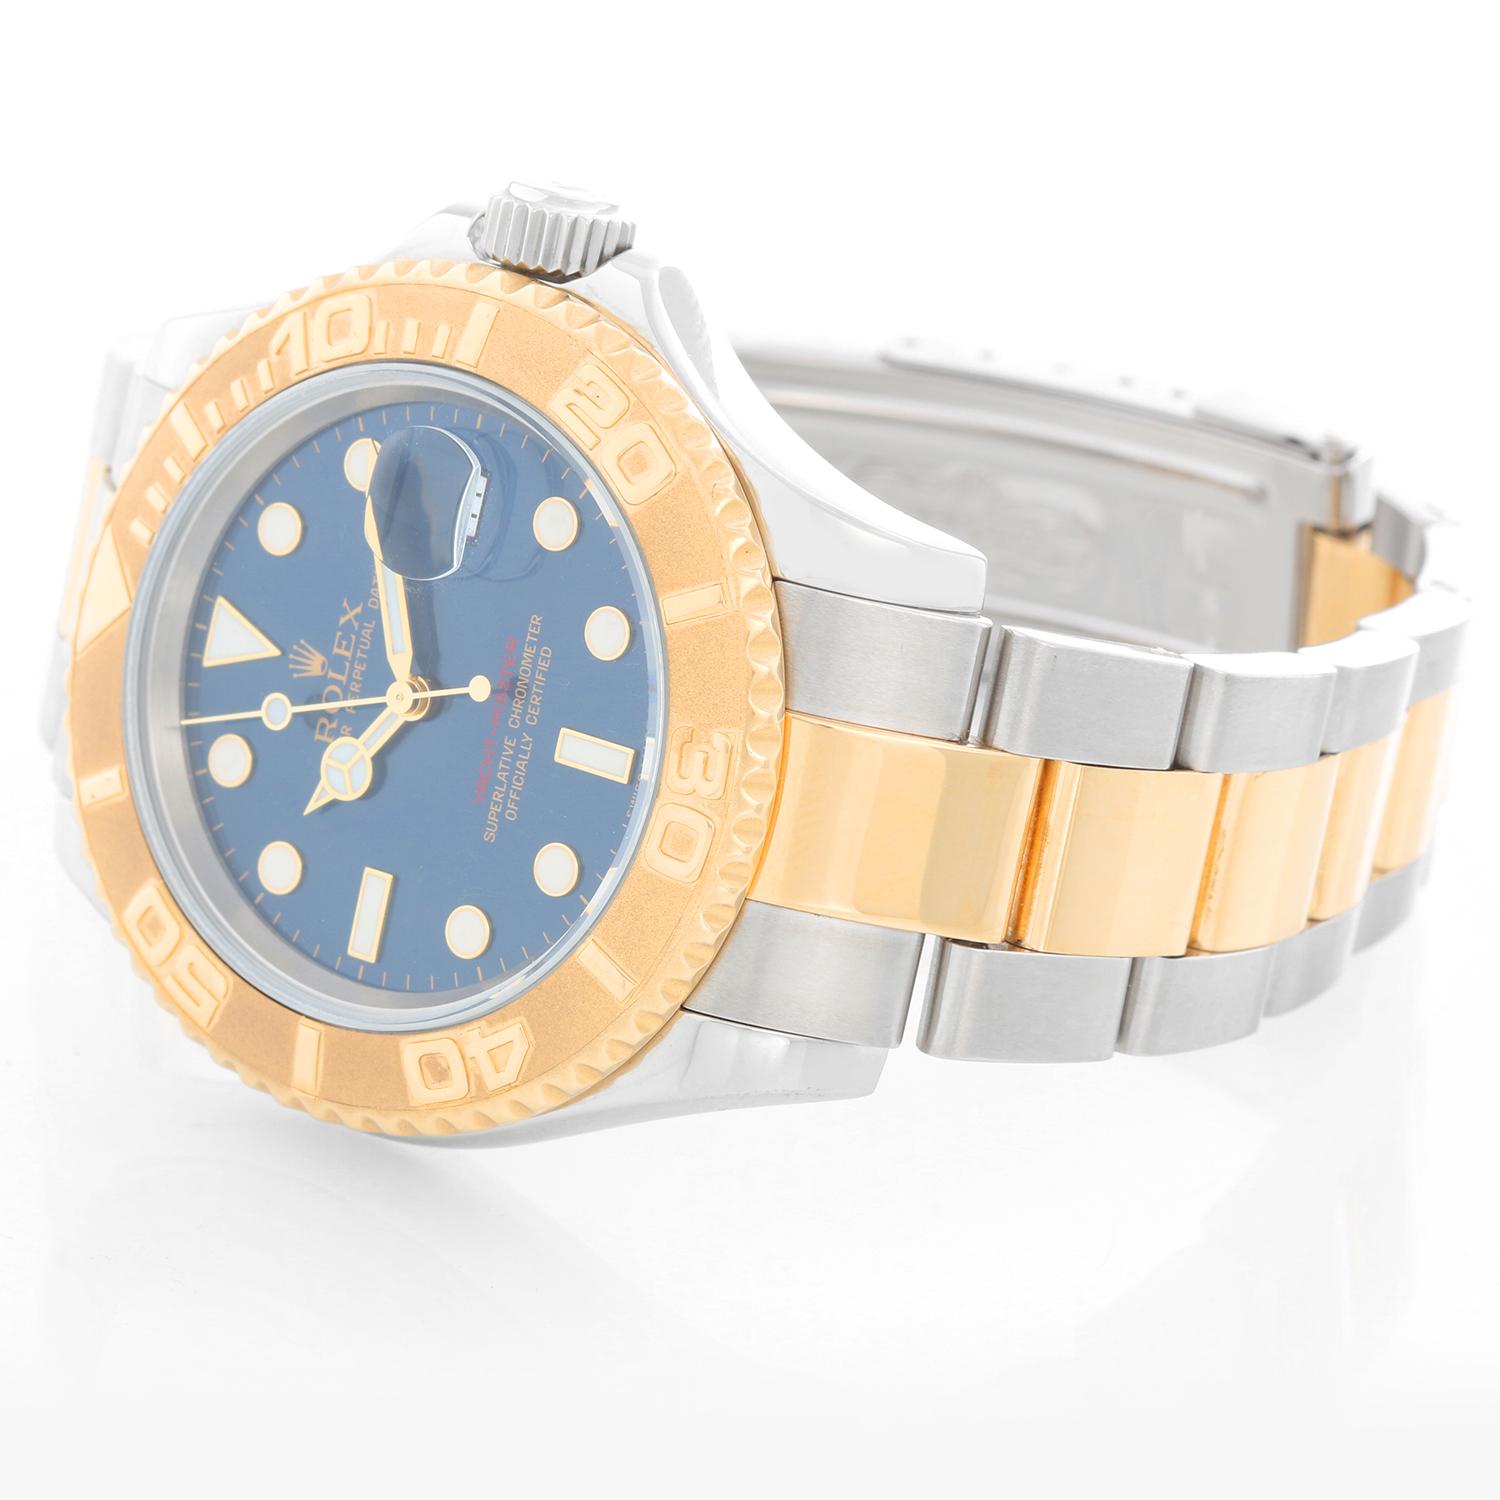 Rolex Yacht-Master Steel & Gold Men's 2-Tone Watch 16623 - Automatic winding, 31 jewels, Quickset, sapphire crystal. Stainless steel case with 18k yellow gold bezel  (40mm diameter). Factory Blue Dial. Stainless steel and 18k yellow gold Oyster